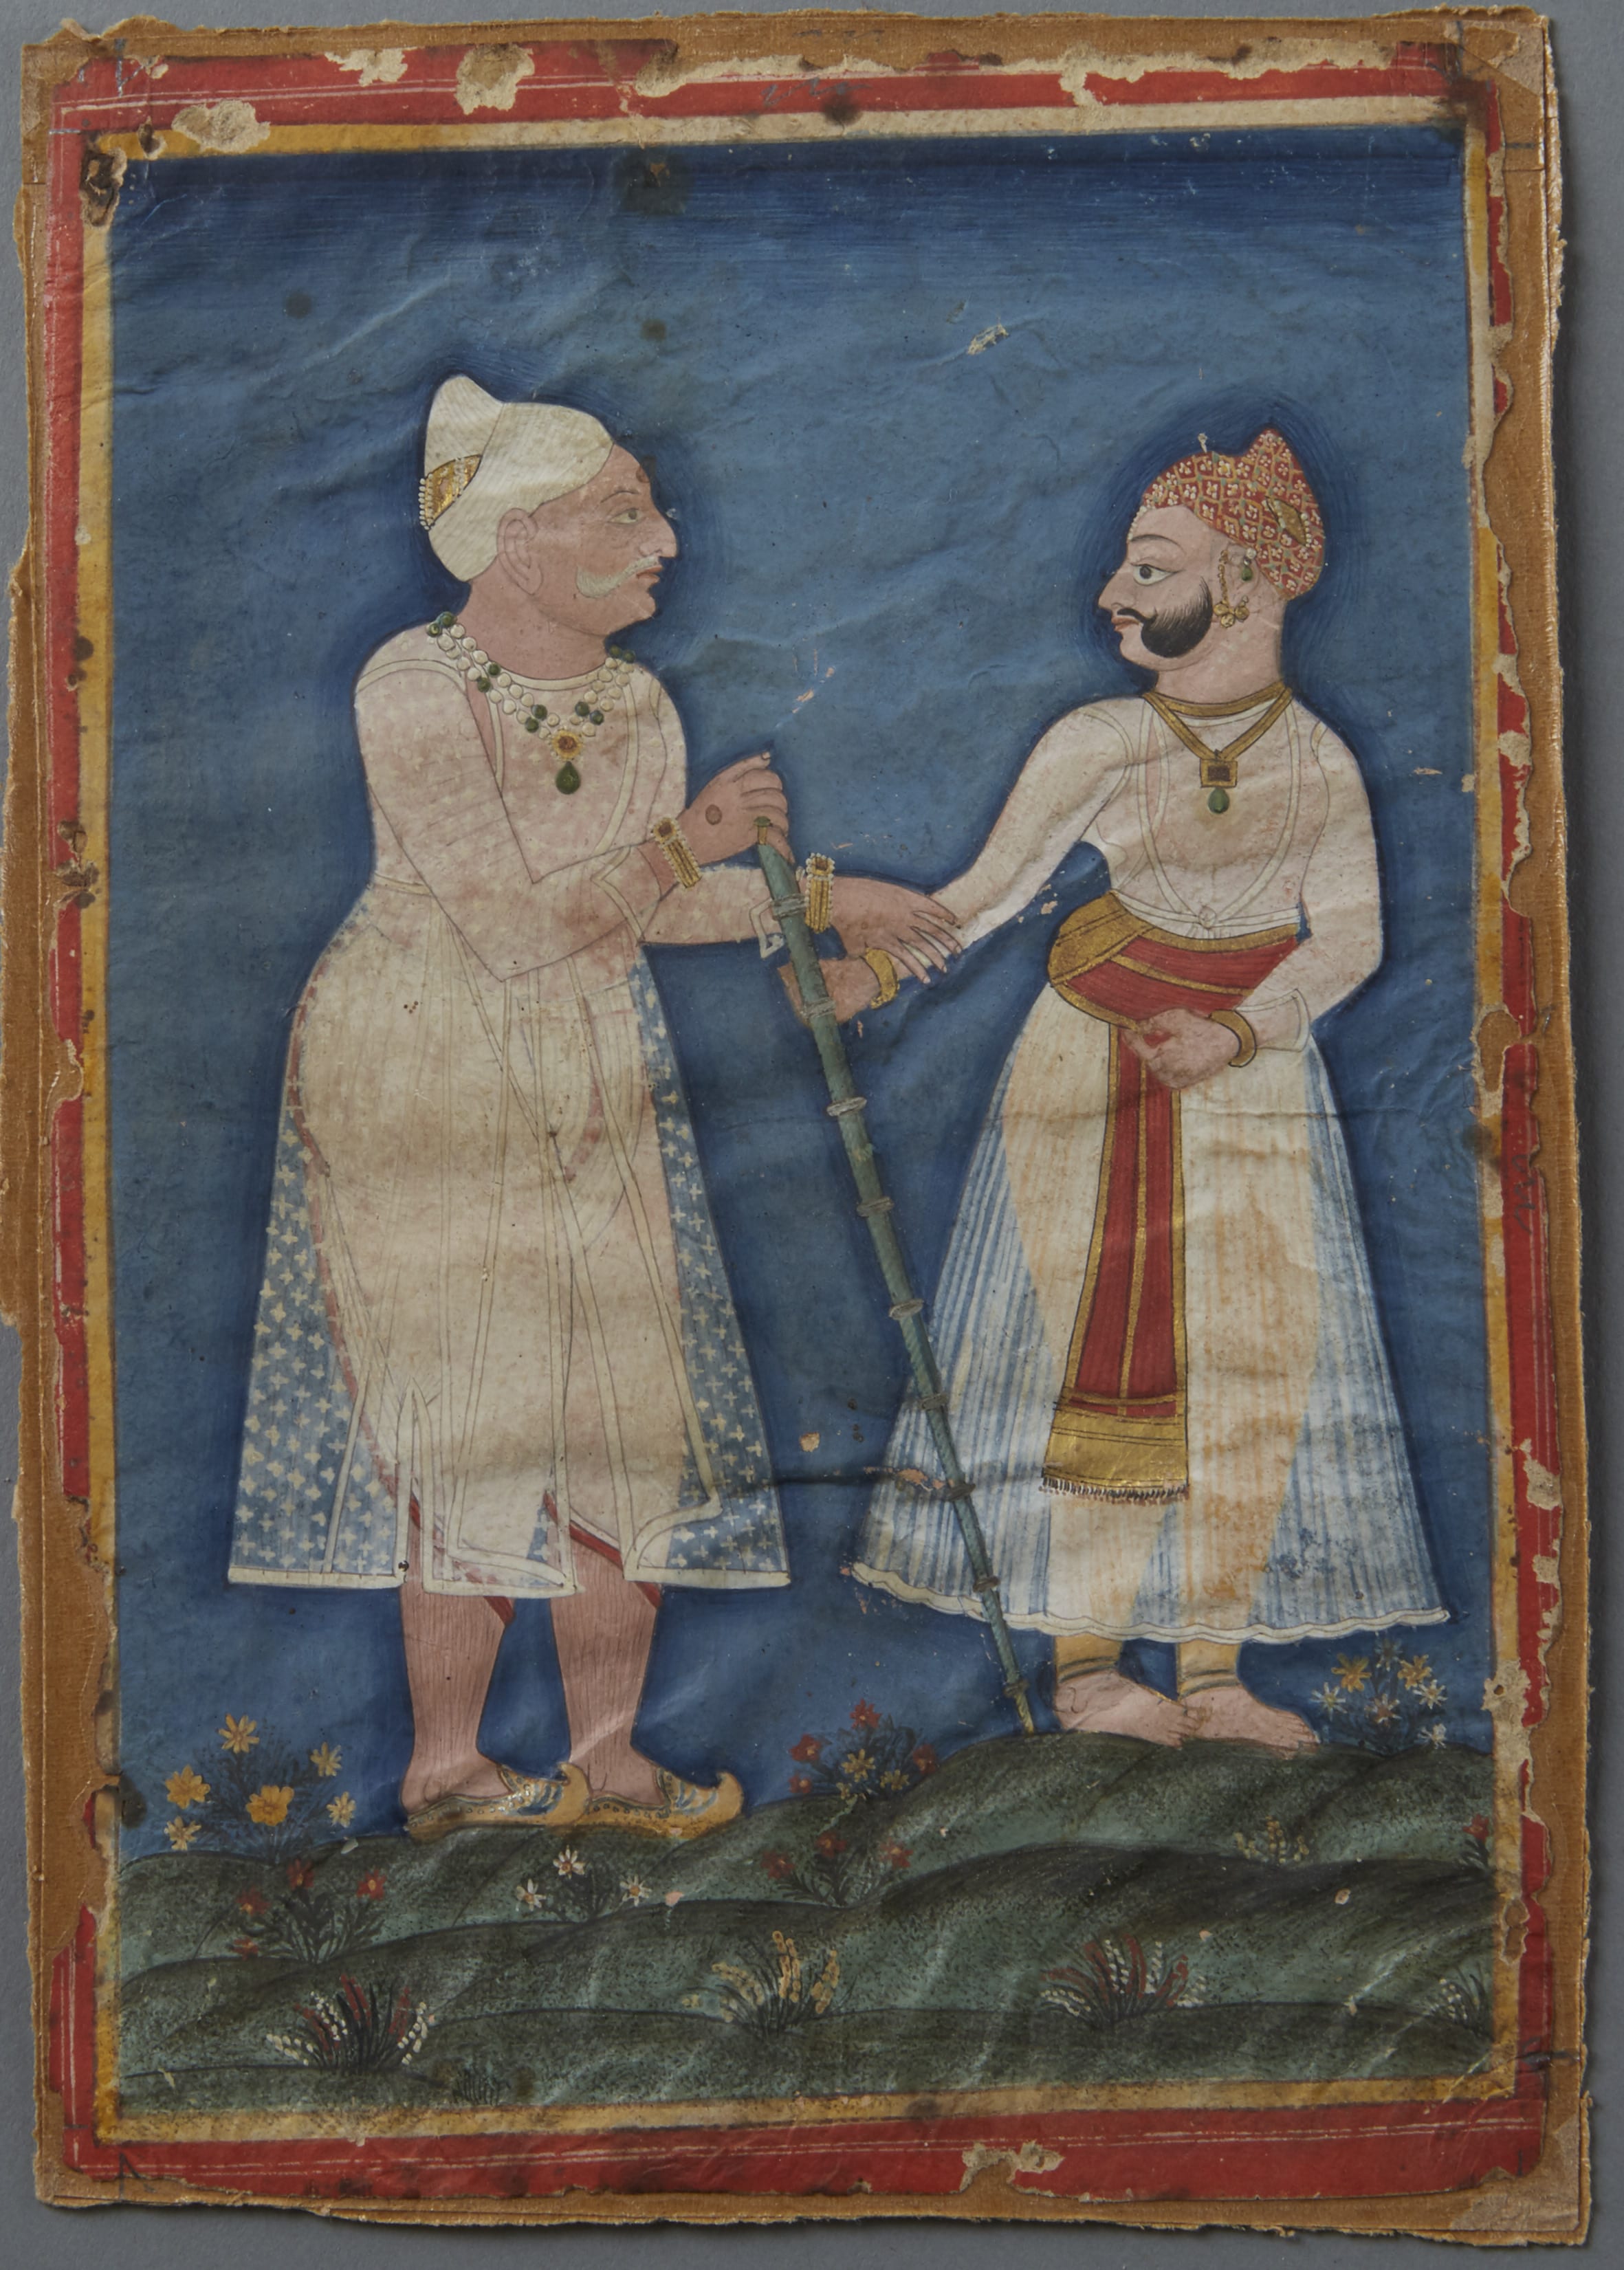 Lot 177: Indo Persina 18th century Illuminated Page of Man with a Cane